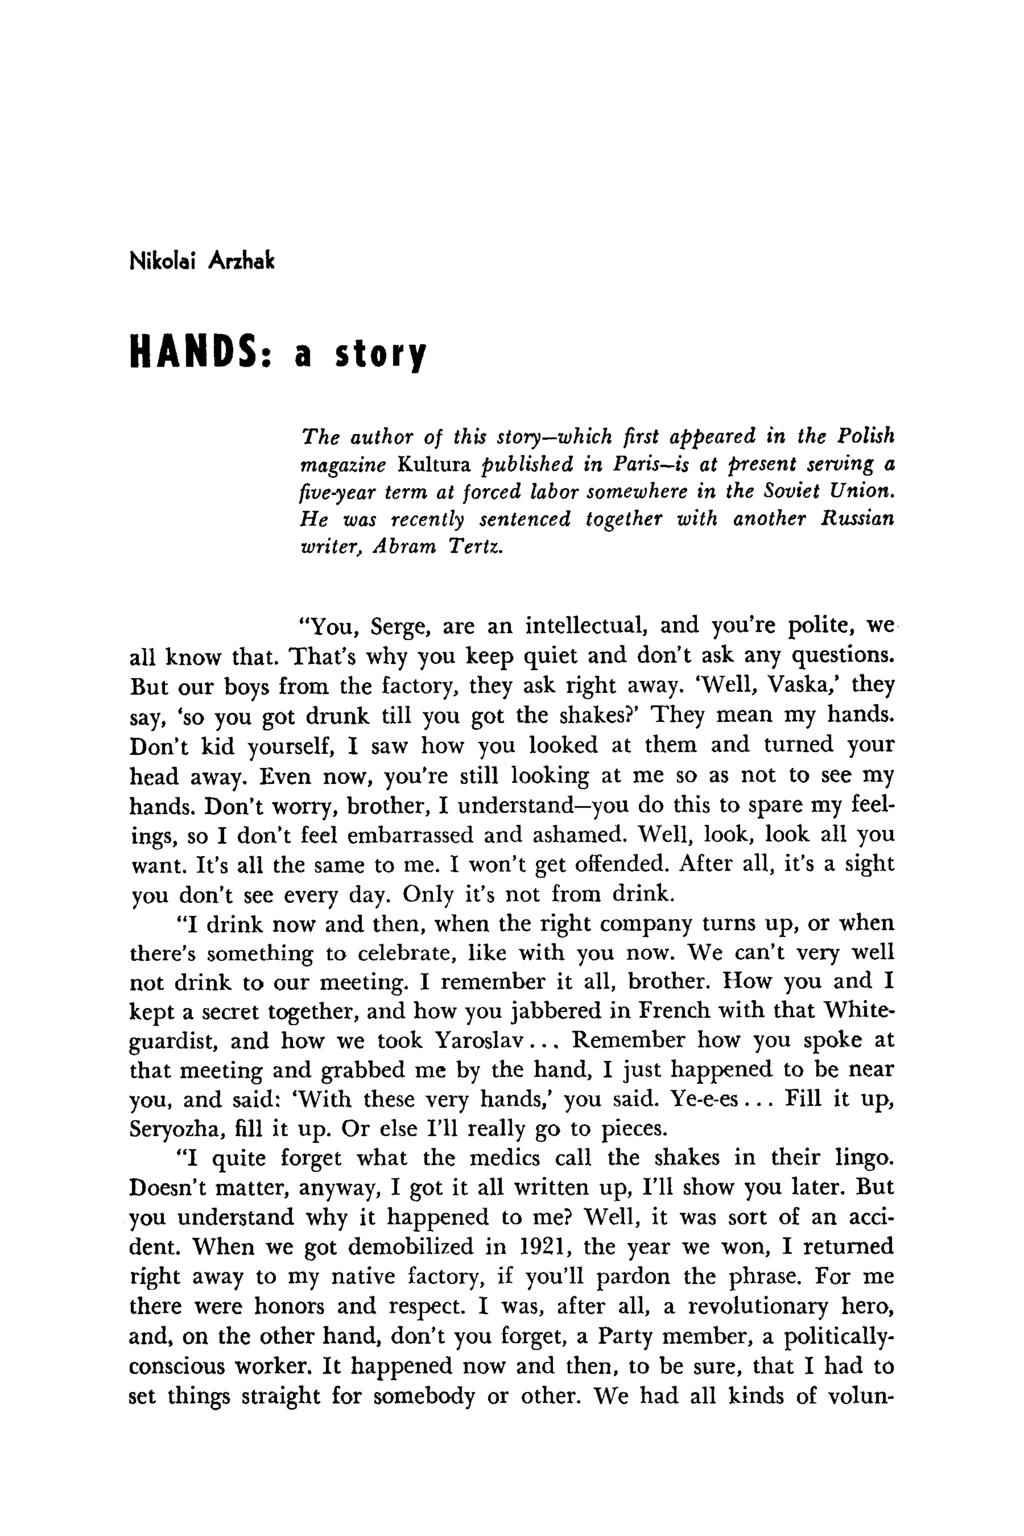 Nikolai Arzhak HANDS: a story The author of this story which first appeared in the Polish magazine Kultura published in Paris is at present serving a five-year term at forced labor somewhere in the